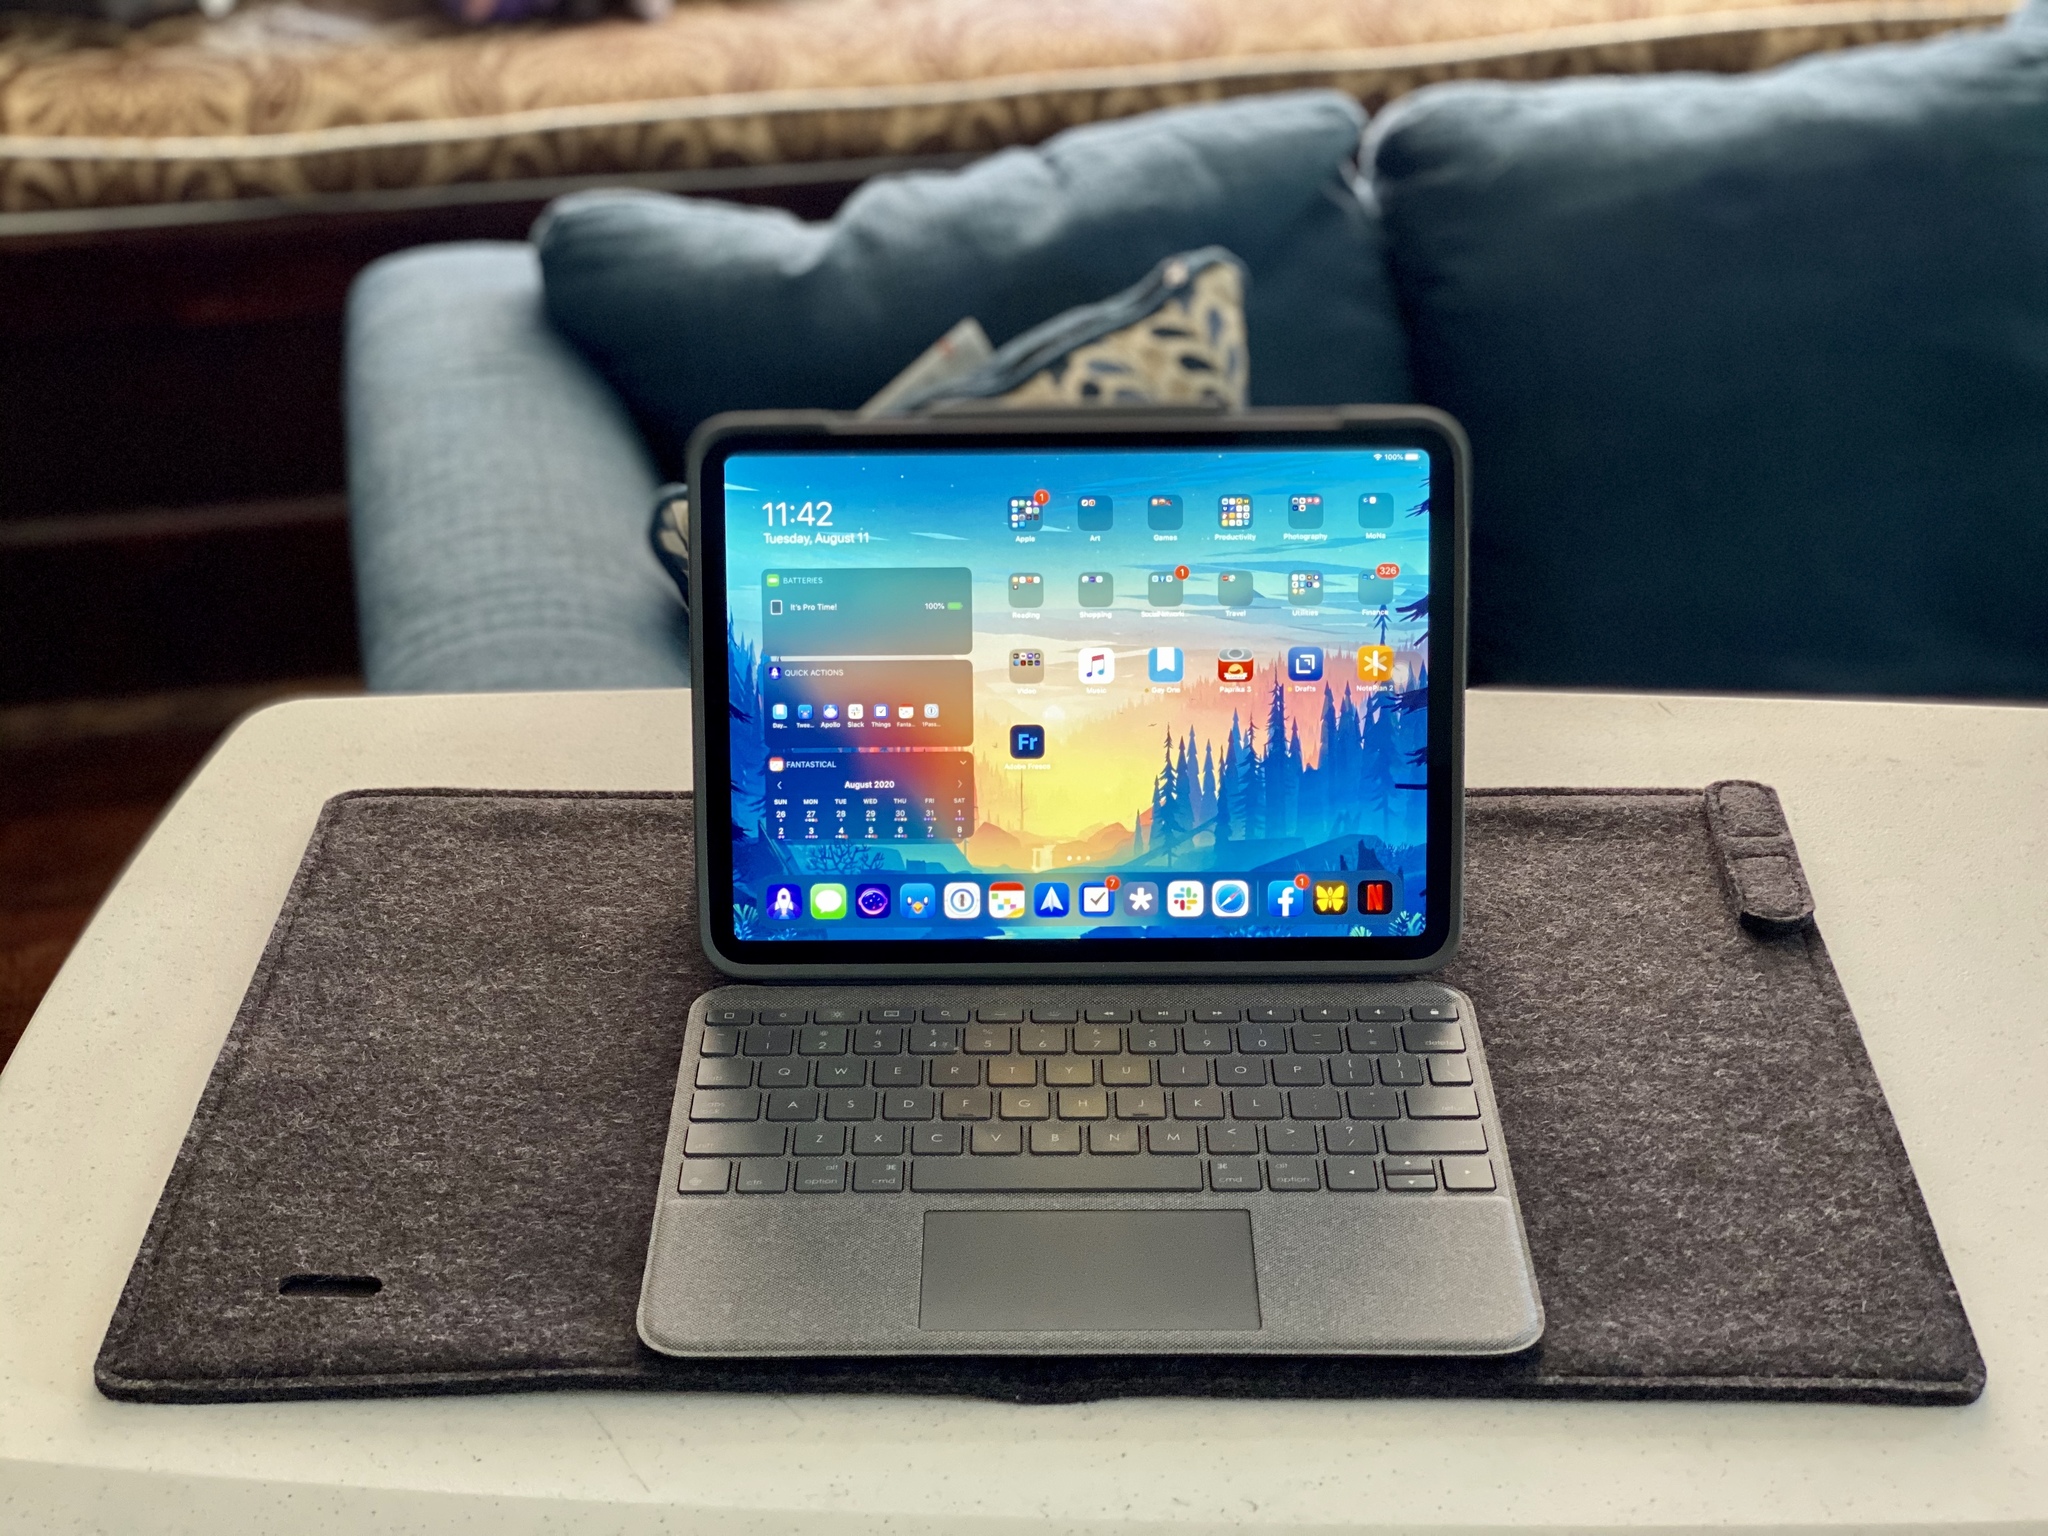 Magic Sleeve for iPad Pro review: A clever sleeve and desk mat in